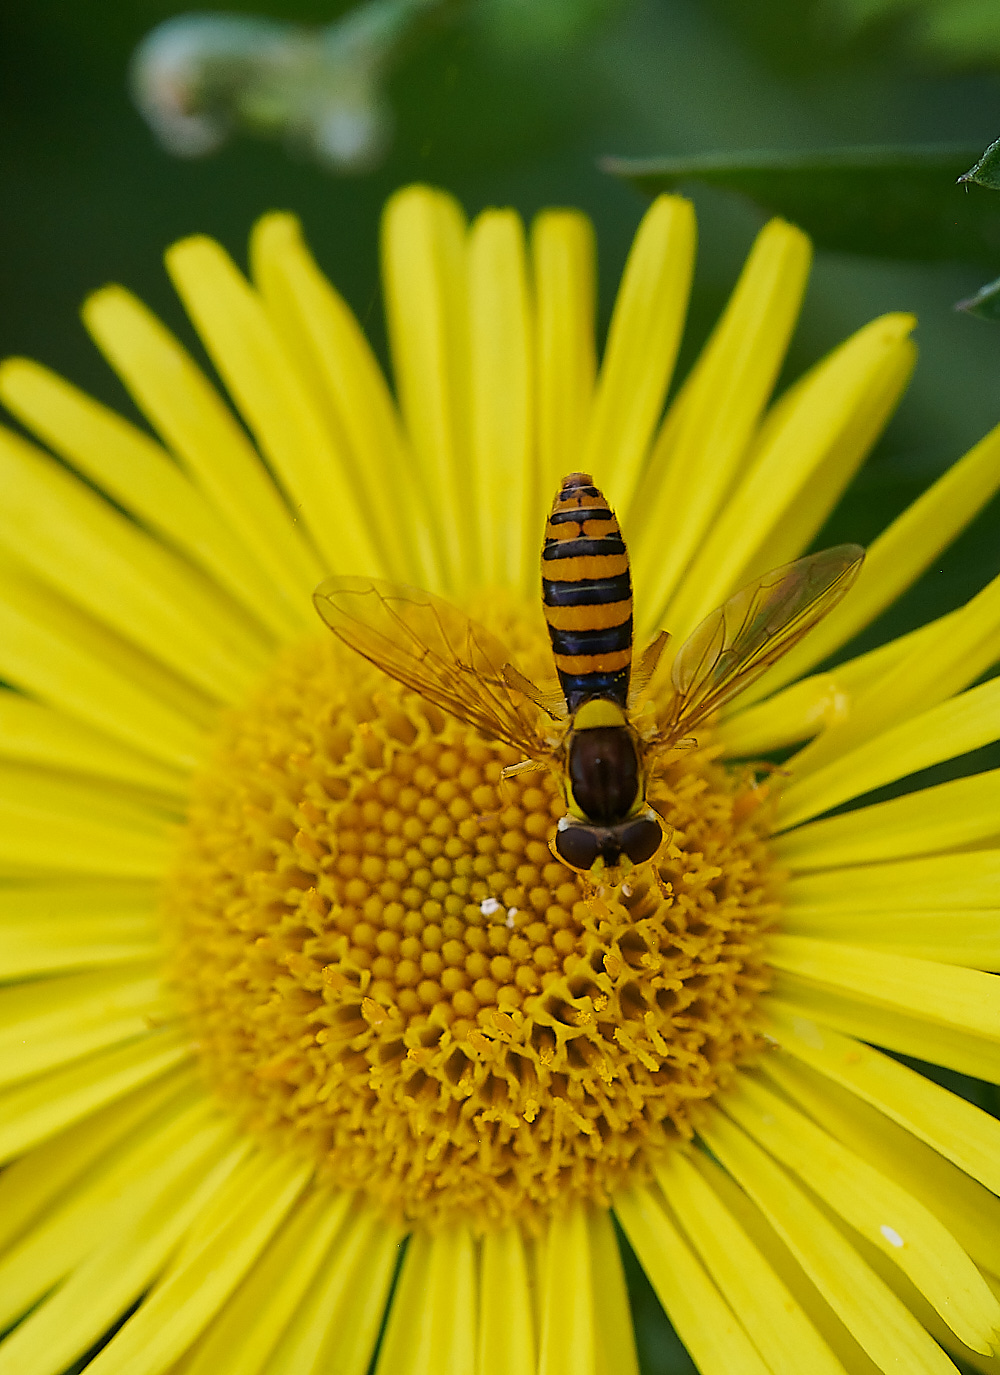 WhitwellHoverfly2140821-2